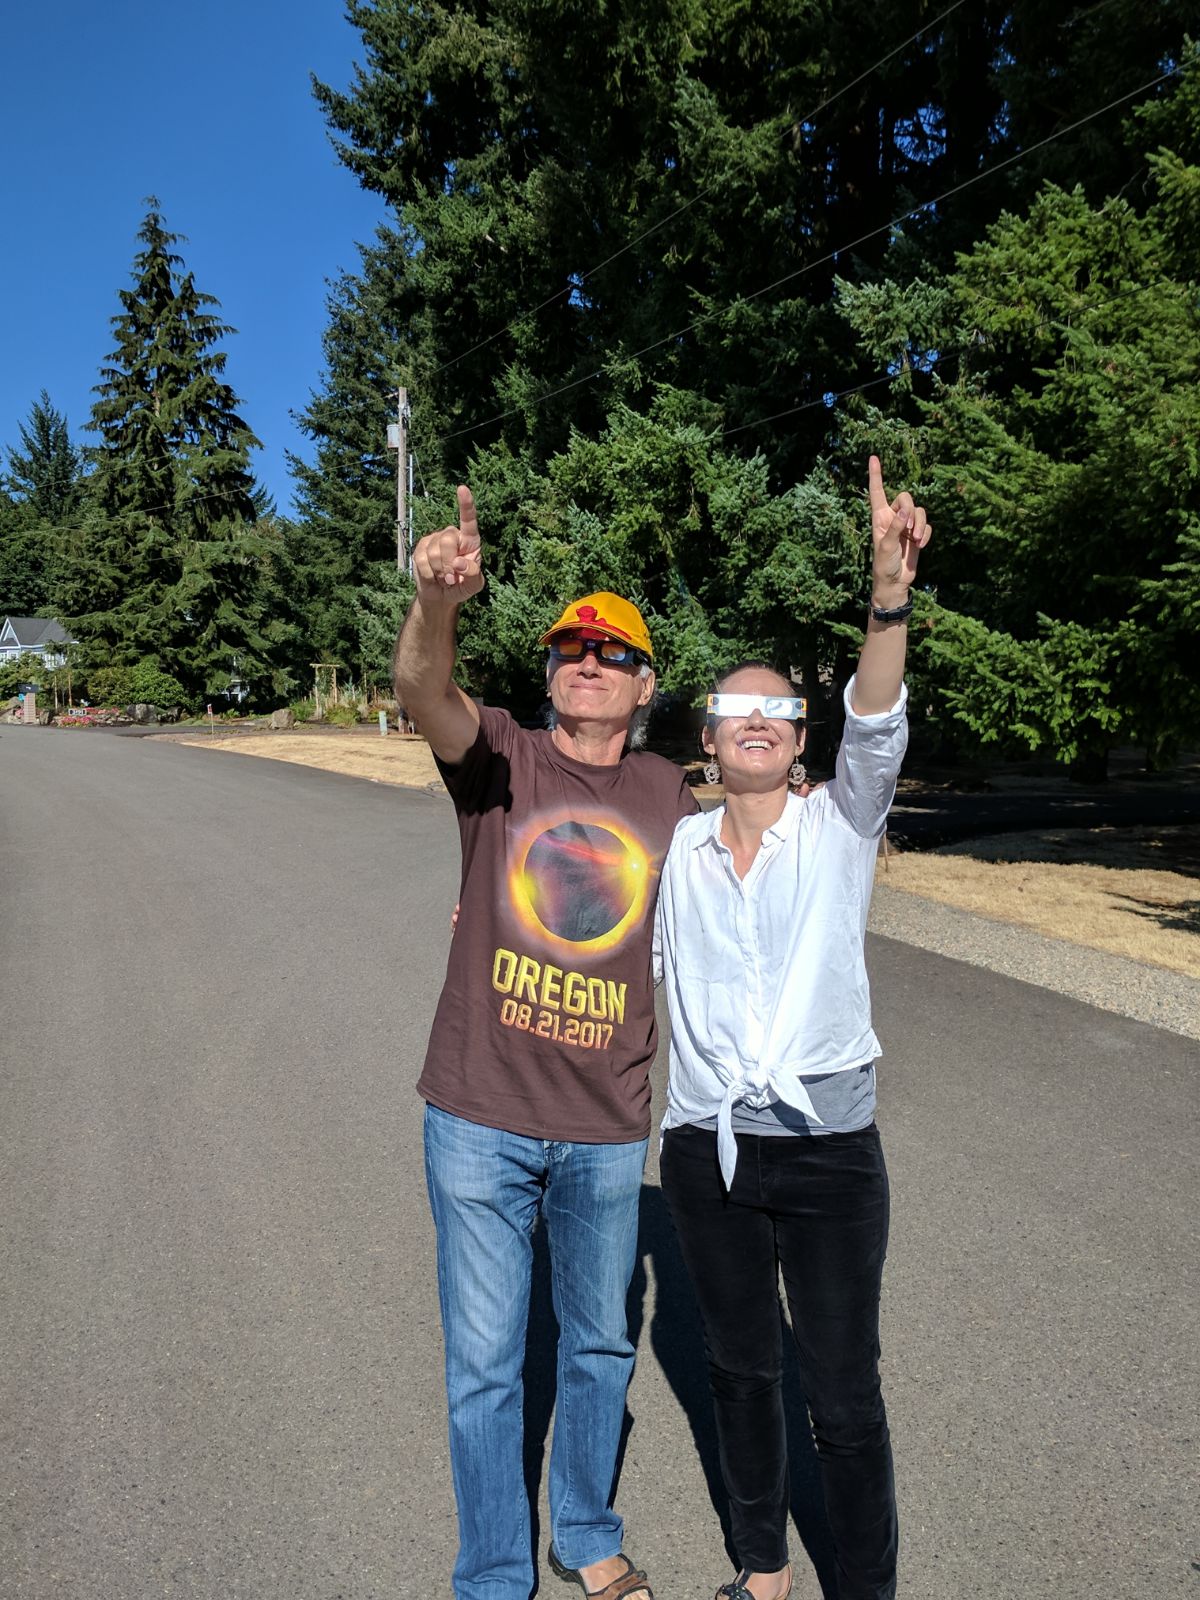 Dr. Aleida Higginson and her Goddard thesis advisor, Dr. Spiro Antiocho,s preparing to watch the great American solar eclipse in Oregon in 2017.